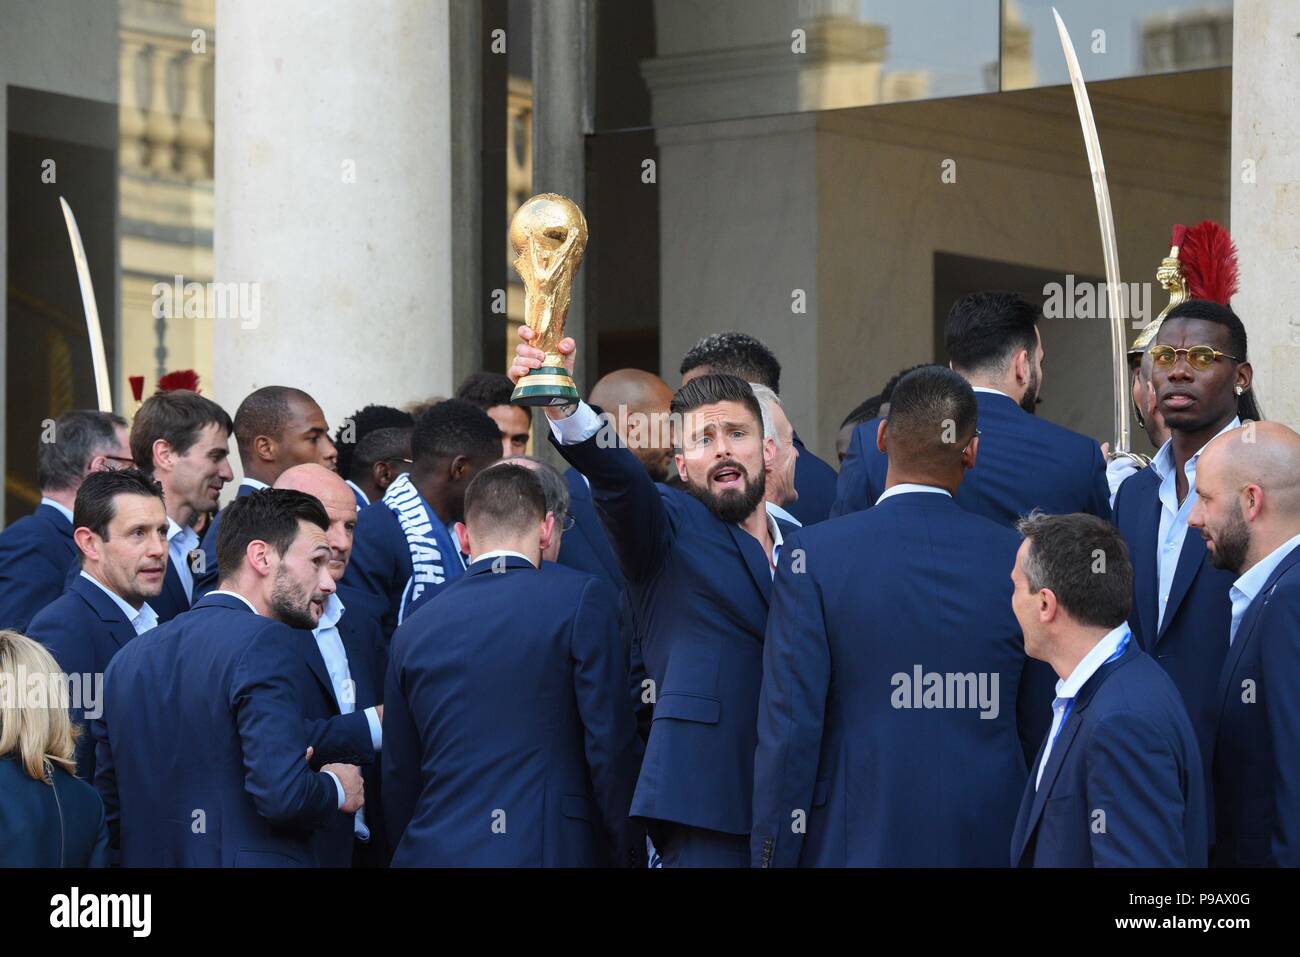 Paris, France. 16th July 2018. French footballer Olivier Giroud holds the World Cup trophy at the presidential Elysee palace in the wake of France's World Cup victory. Olivier Giroud avec la Coupe du Monde sur le perron de l'Elysee. *** FRANCE OUT / NO SALES TO FRENCH MEDIA *** Credit: Idealink Photography/Alamy Live News Stock Photo